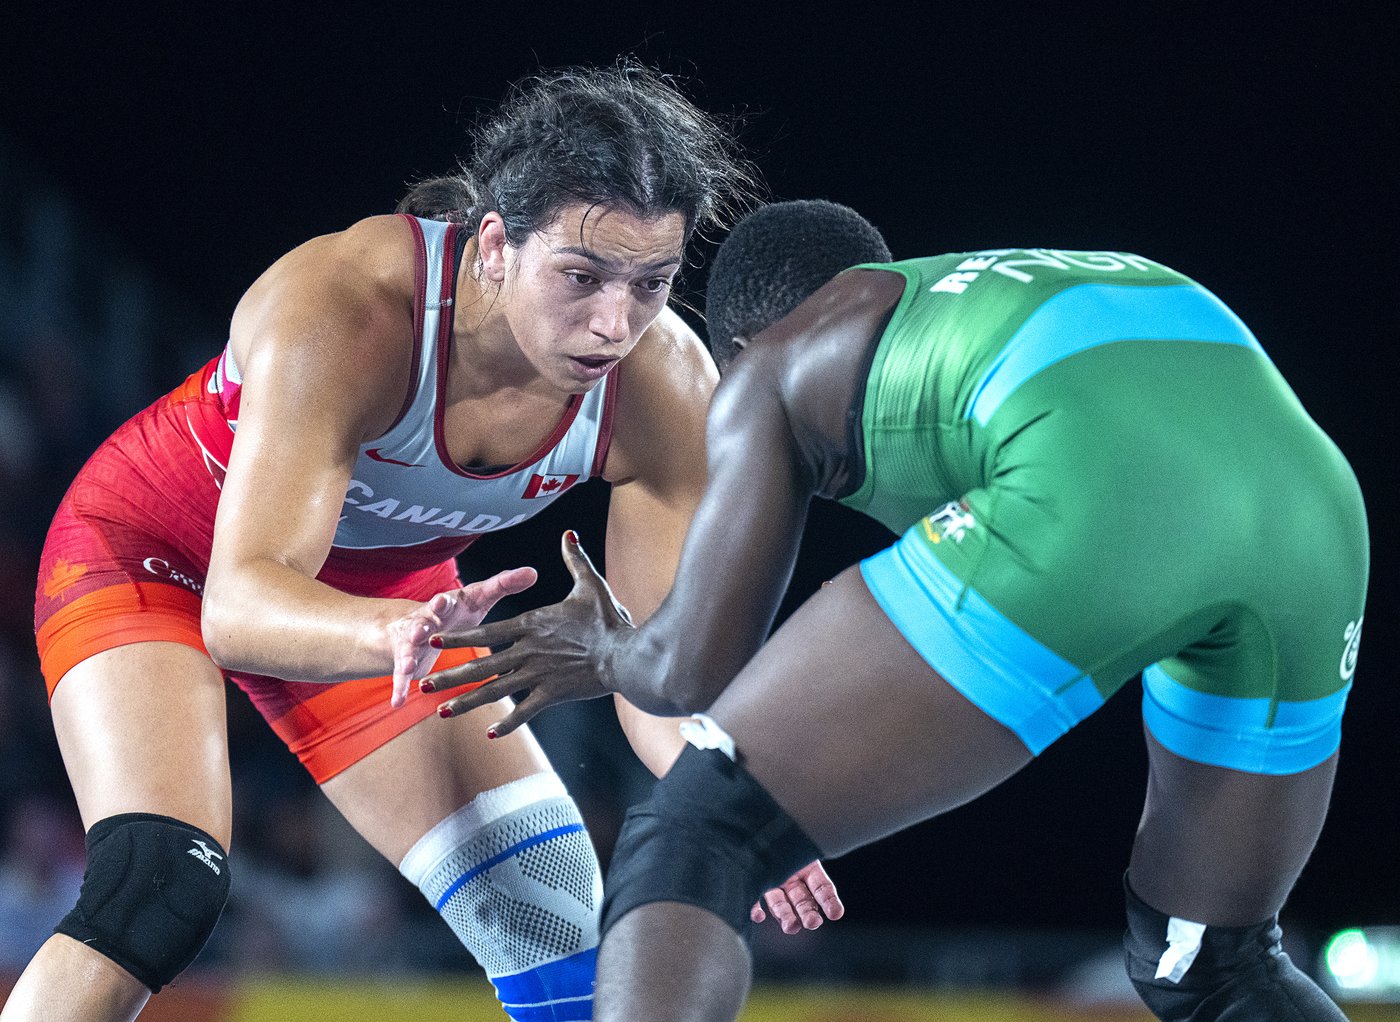 Di Stasio, Dhesi lead Canada’s wrestling team into Olympic Games